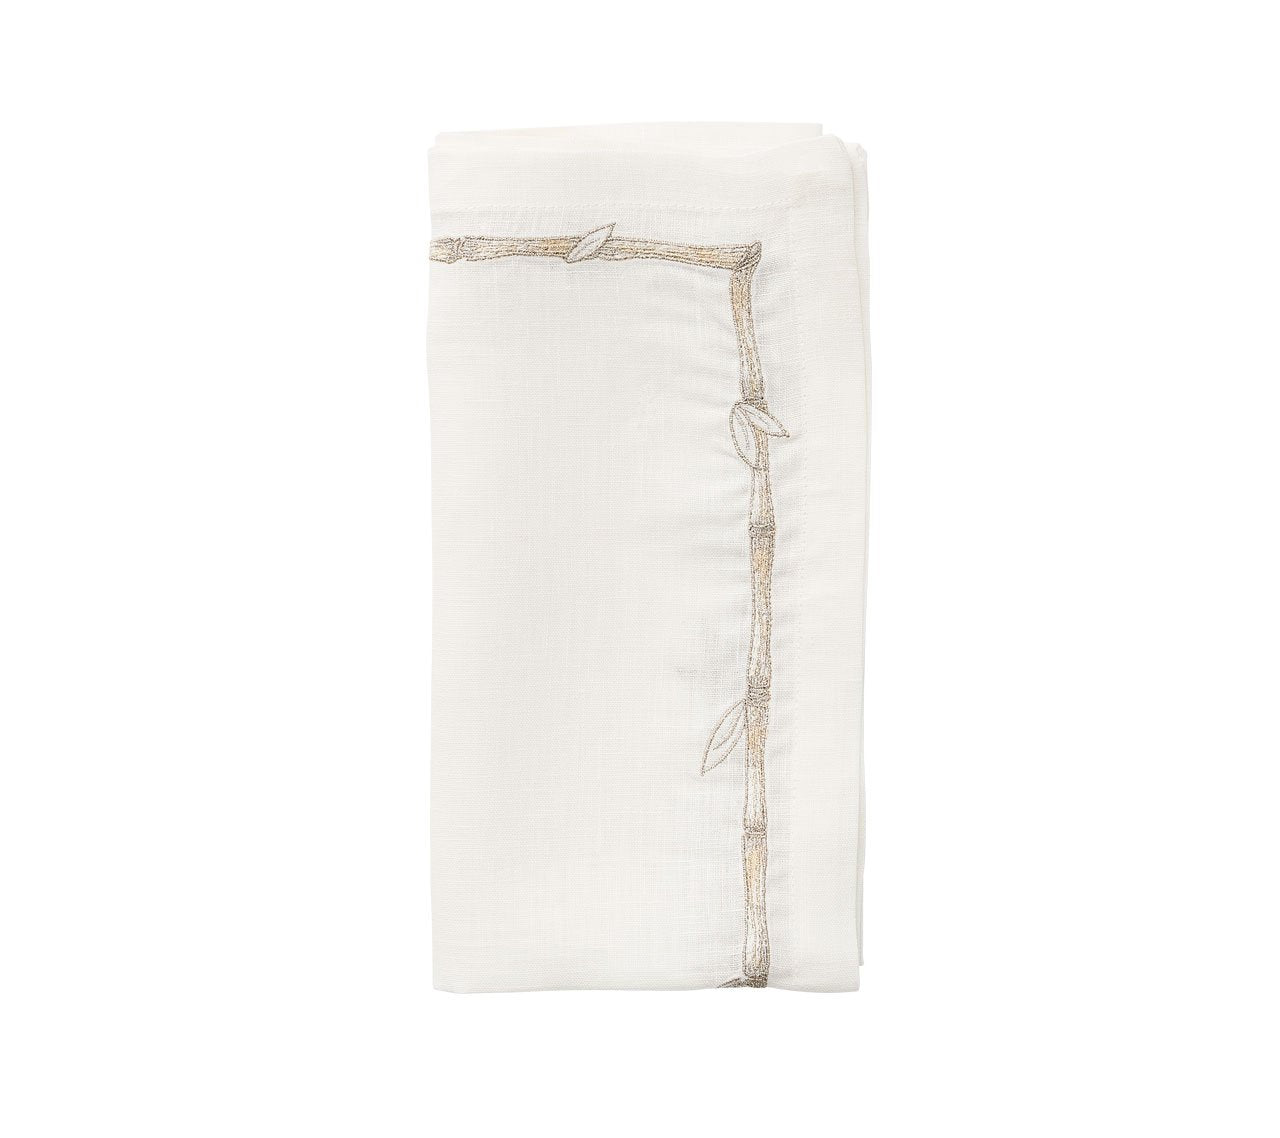 White Bamboo Napkin with a gold and silver border